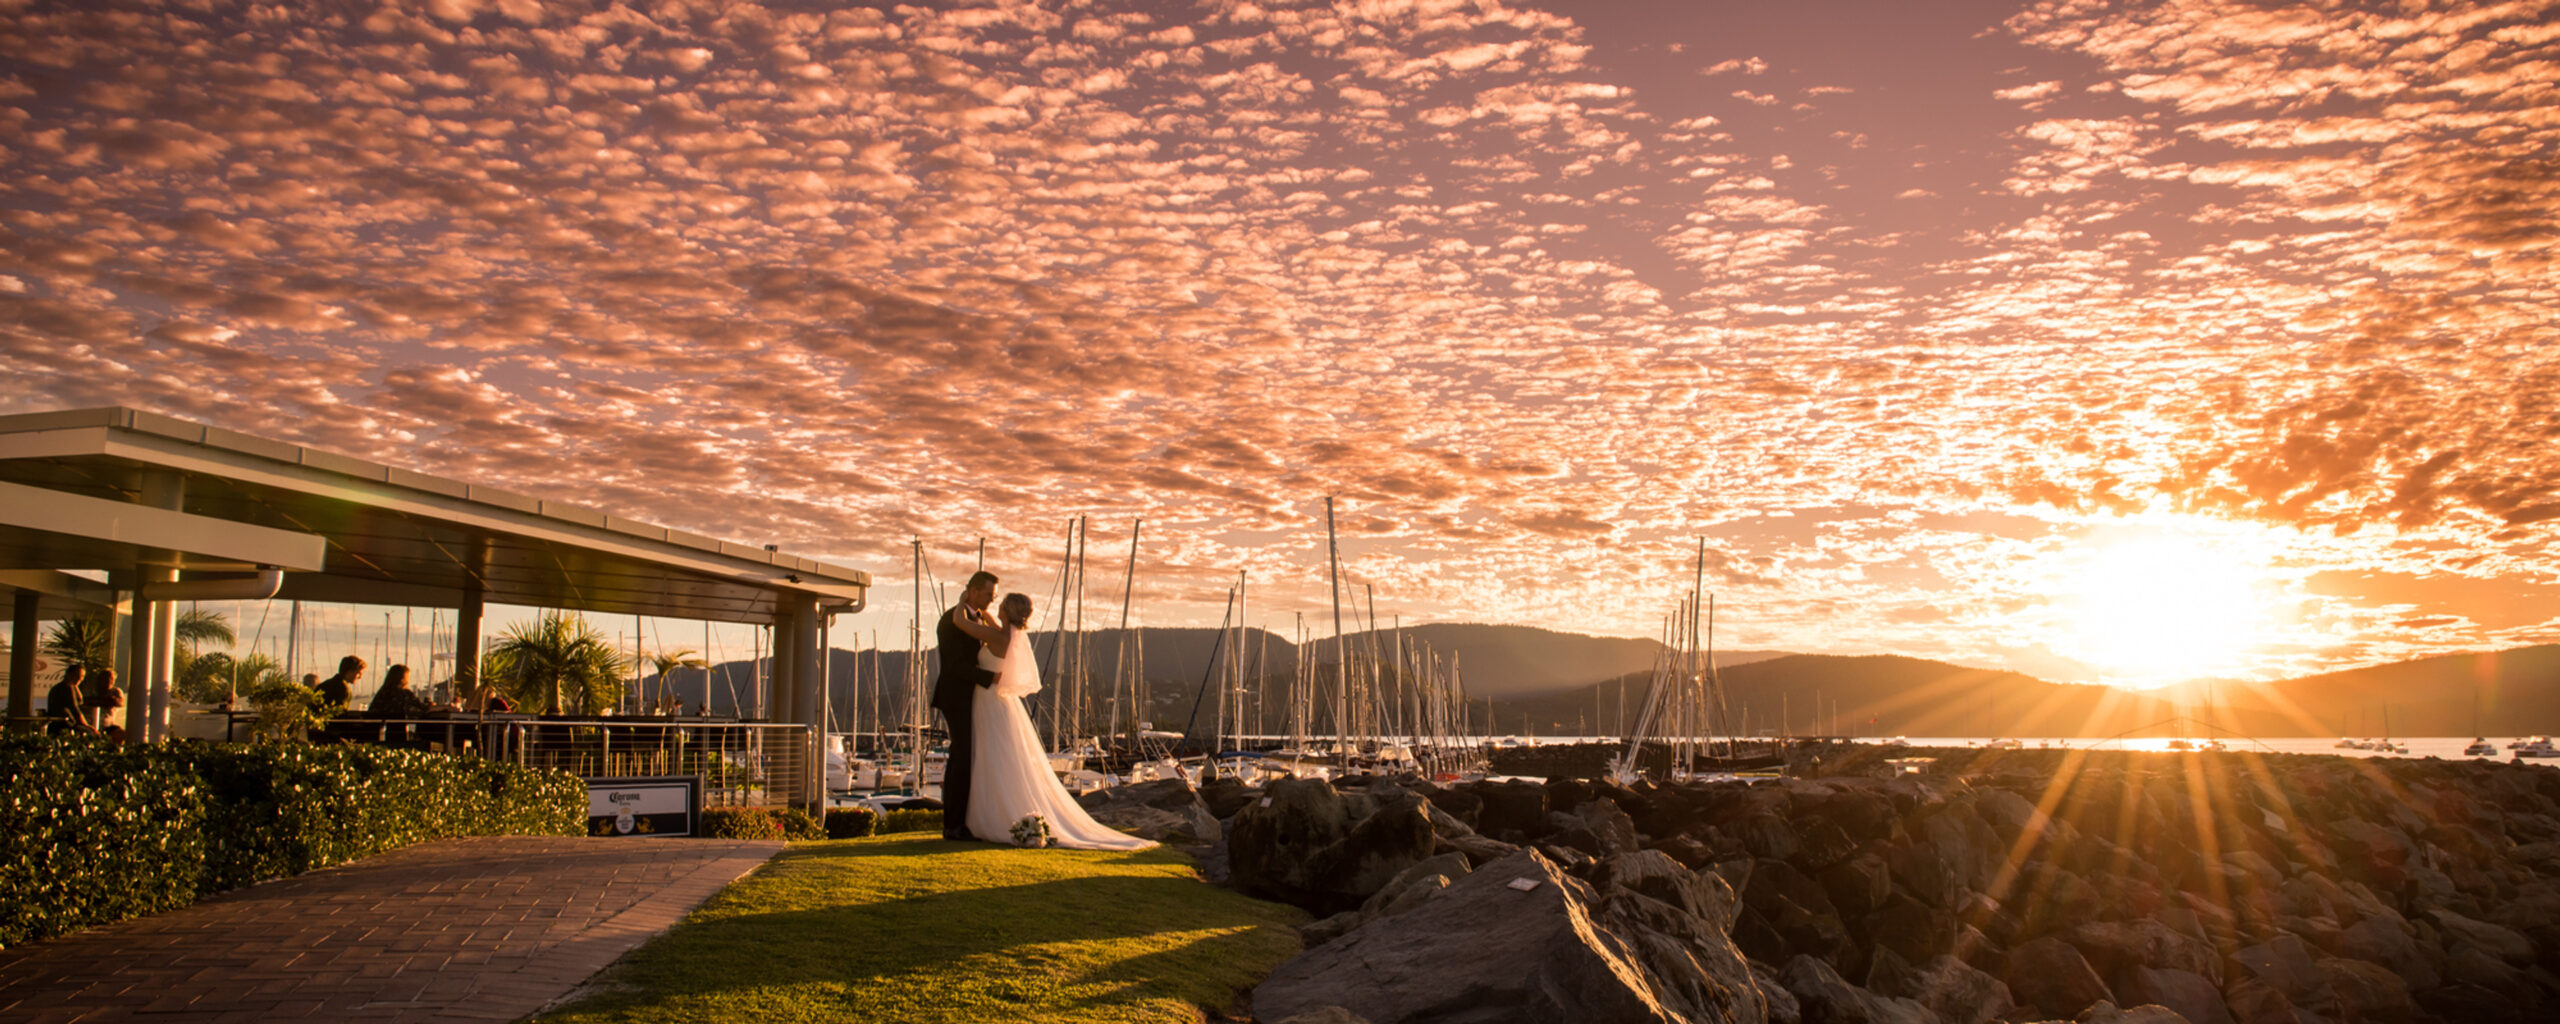 Bride and groom looking at sunset